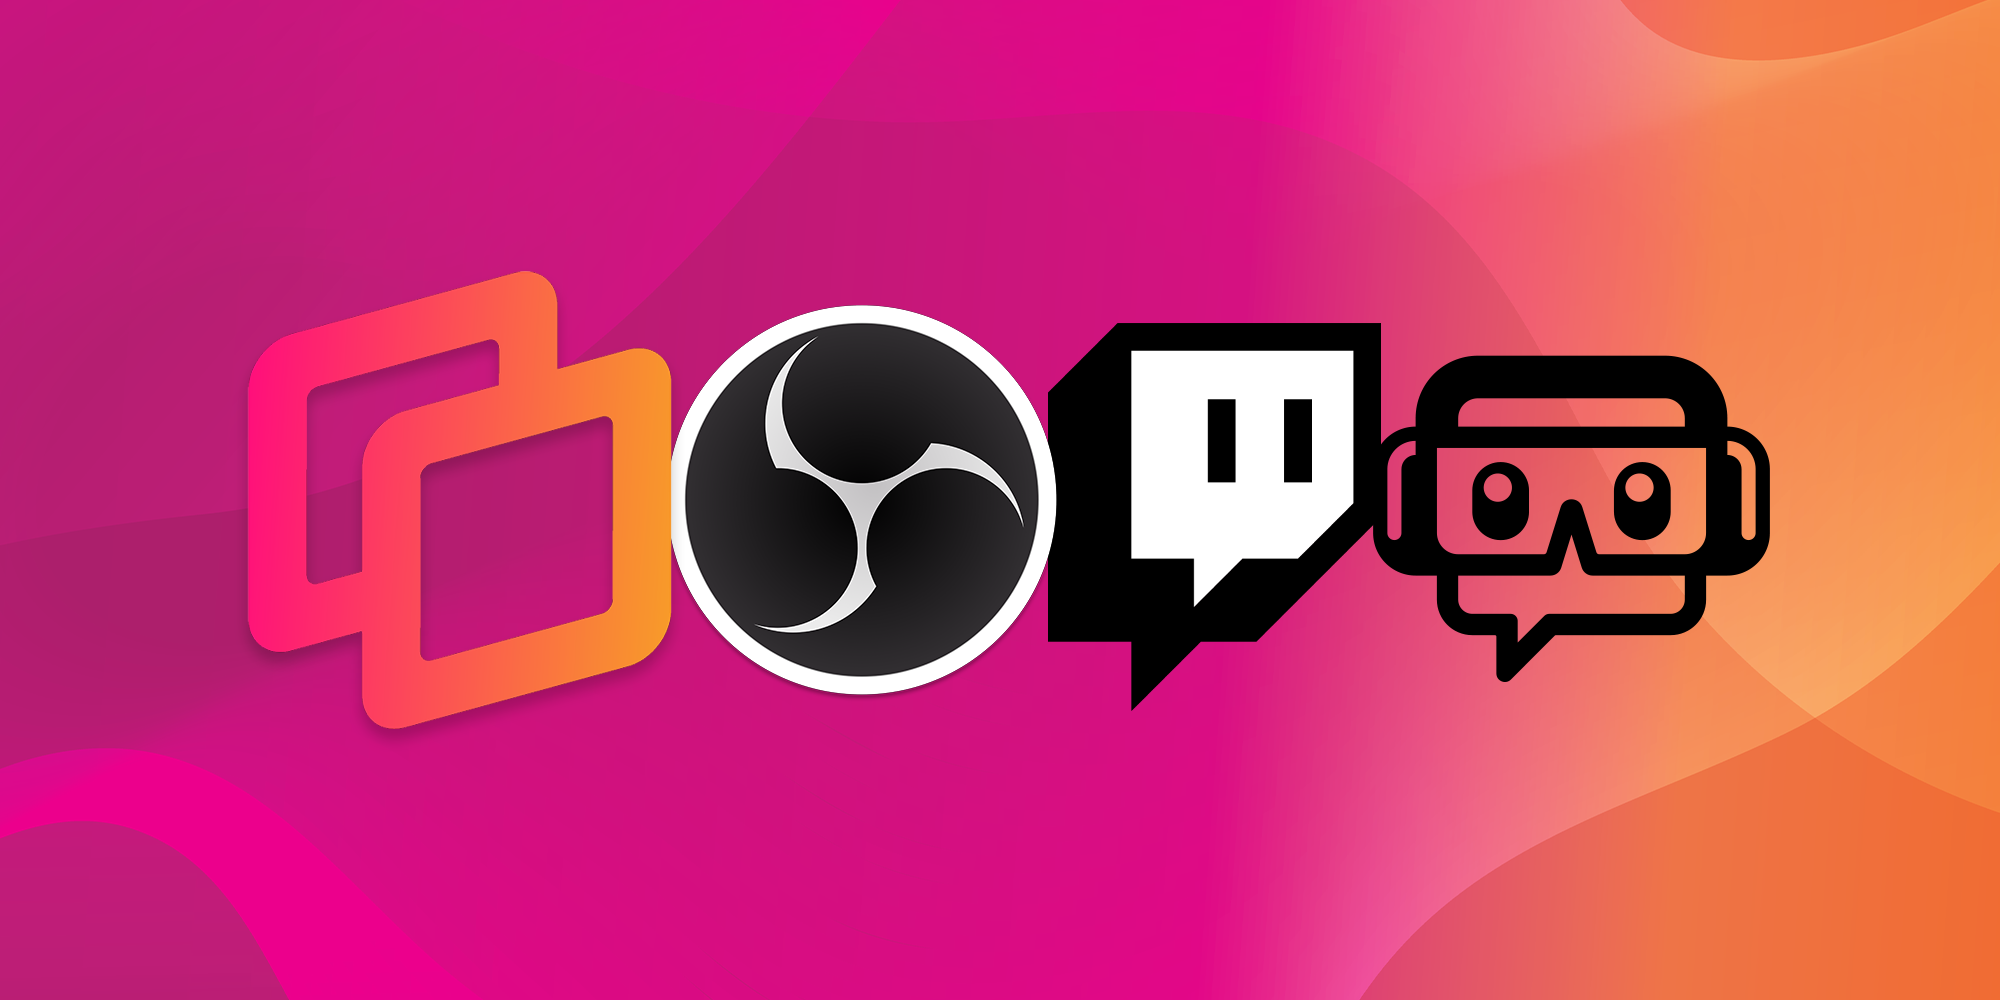 How To Stream Android Ipad And Iphone Games To Twitch With Obs Streamlabs Obs And Twitch Studio